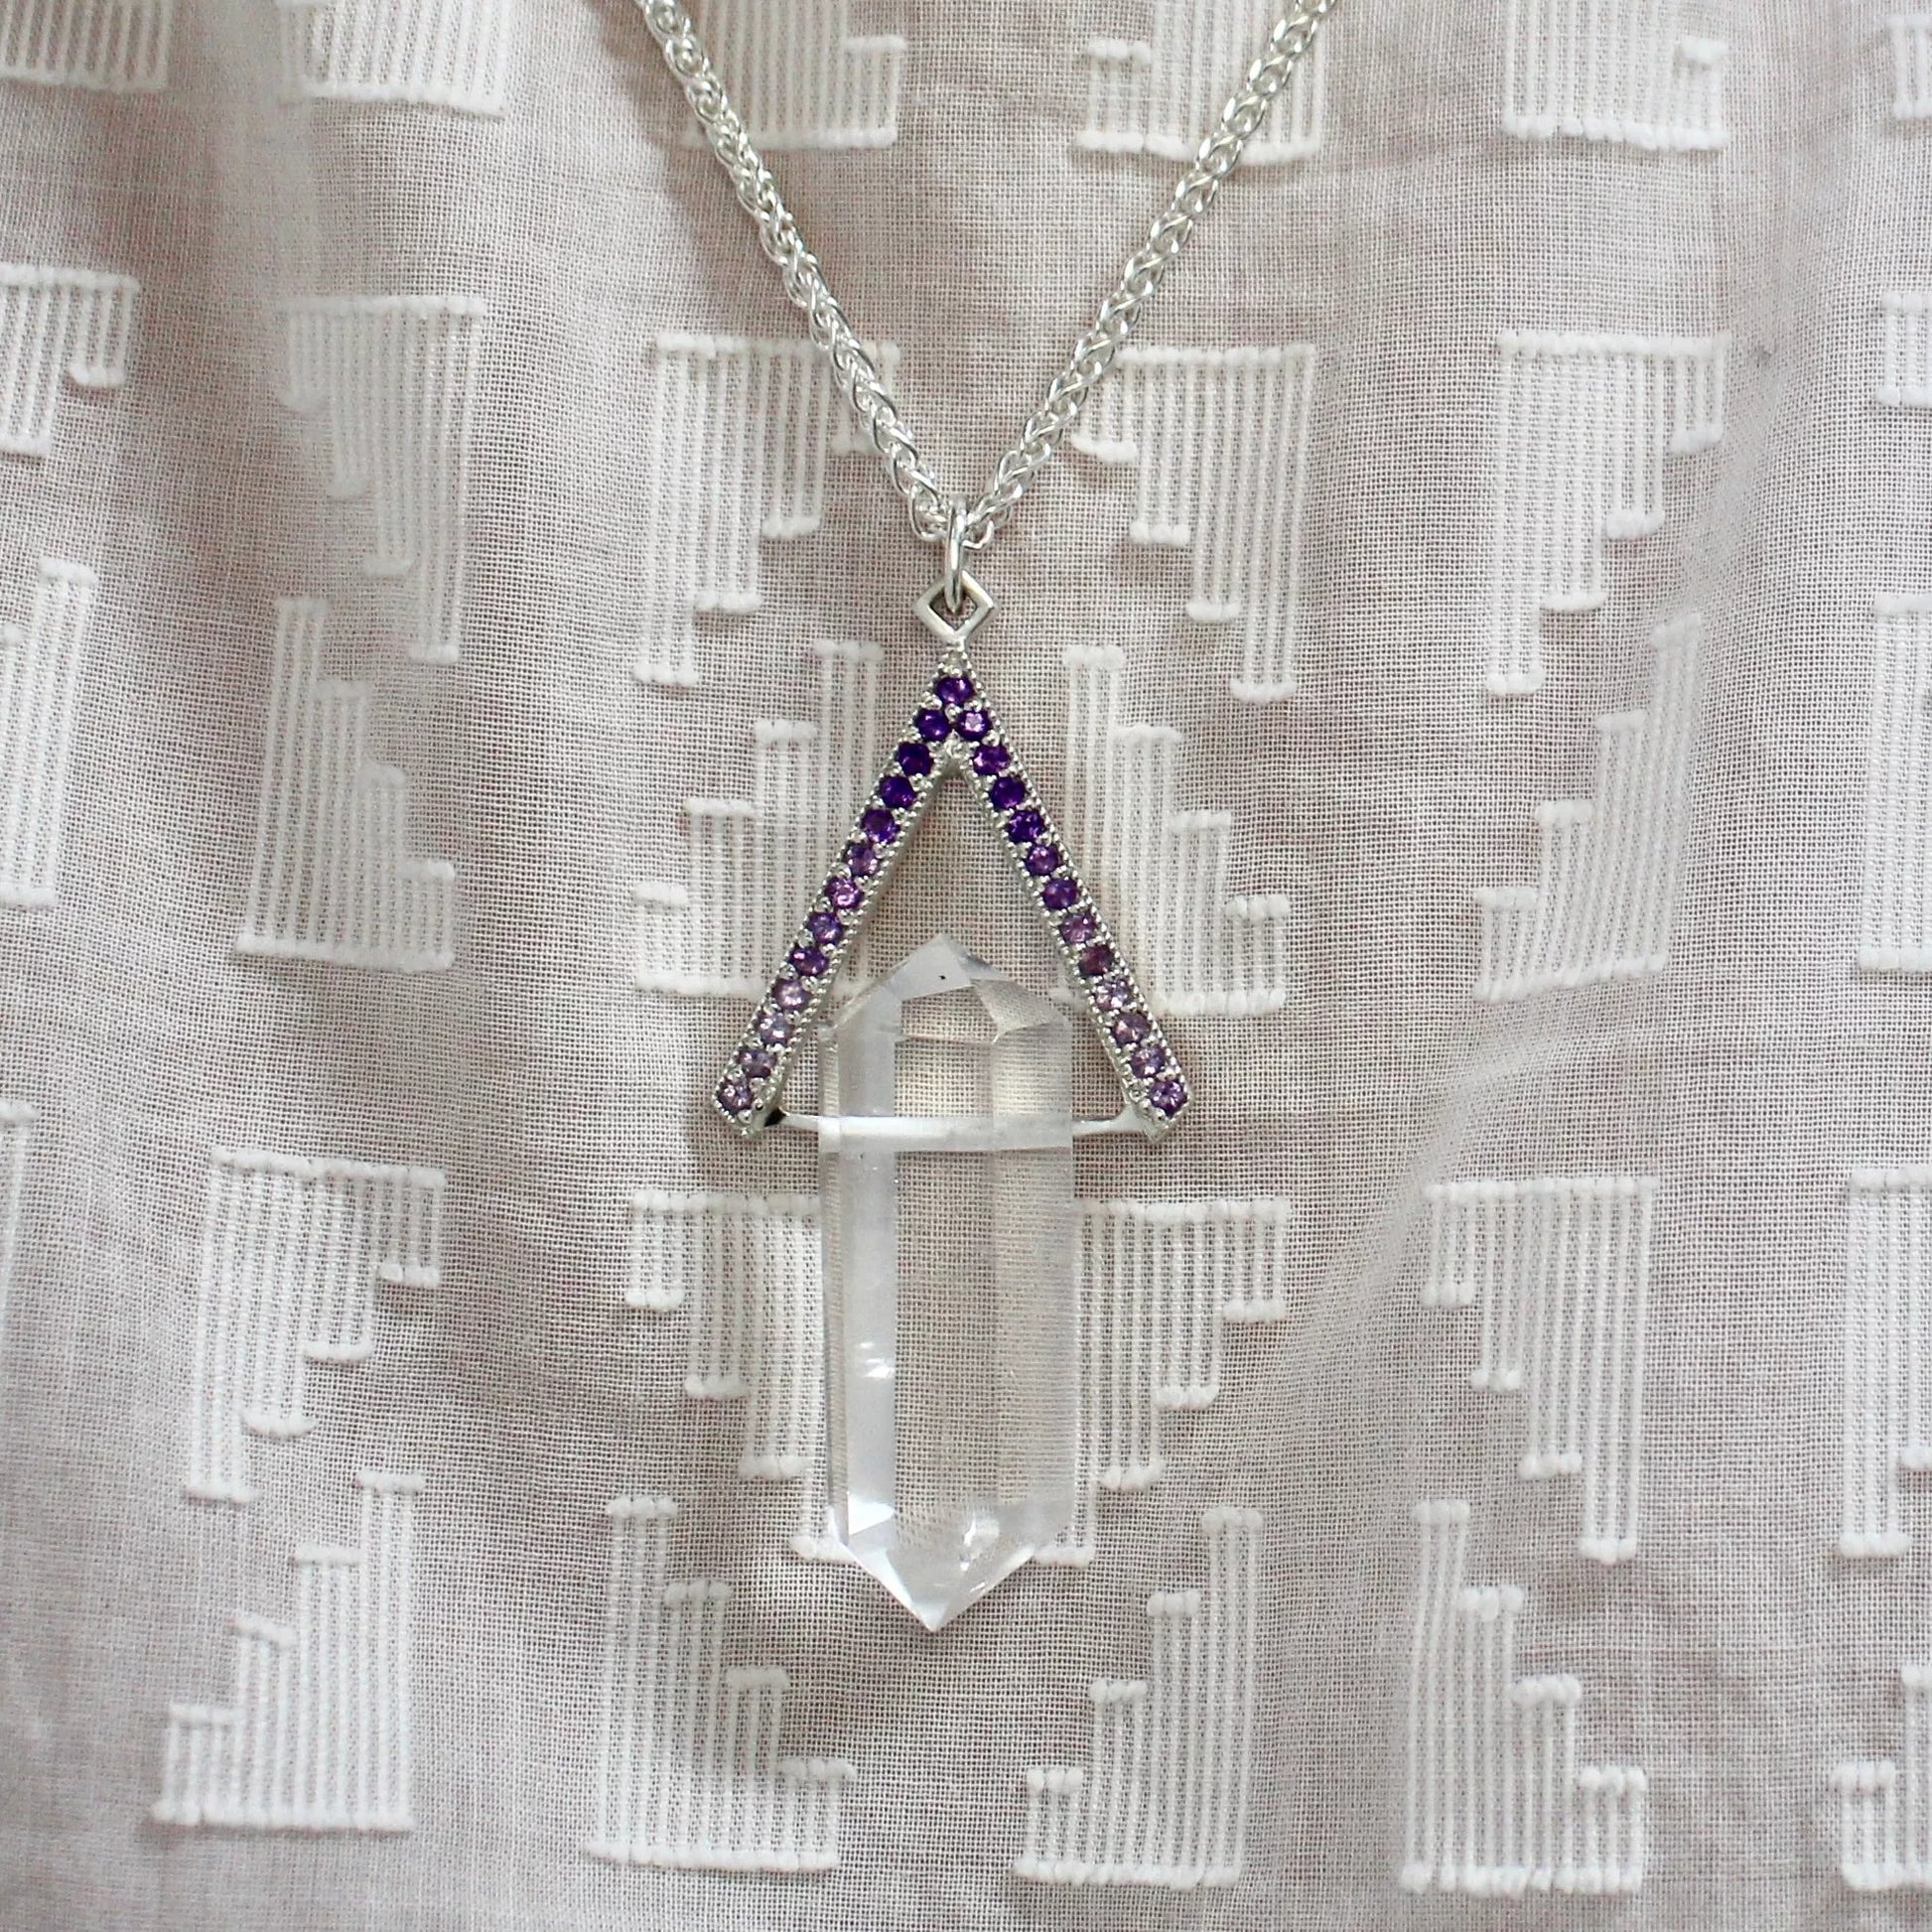 One Of A Kind - Quartz Talisman Necklace with Ombré Amethyst Halo and Secret Motto "Love Is Rich With Honey And Venom", Necklaces, The Serpents Club